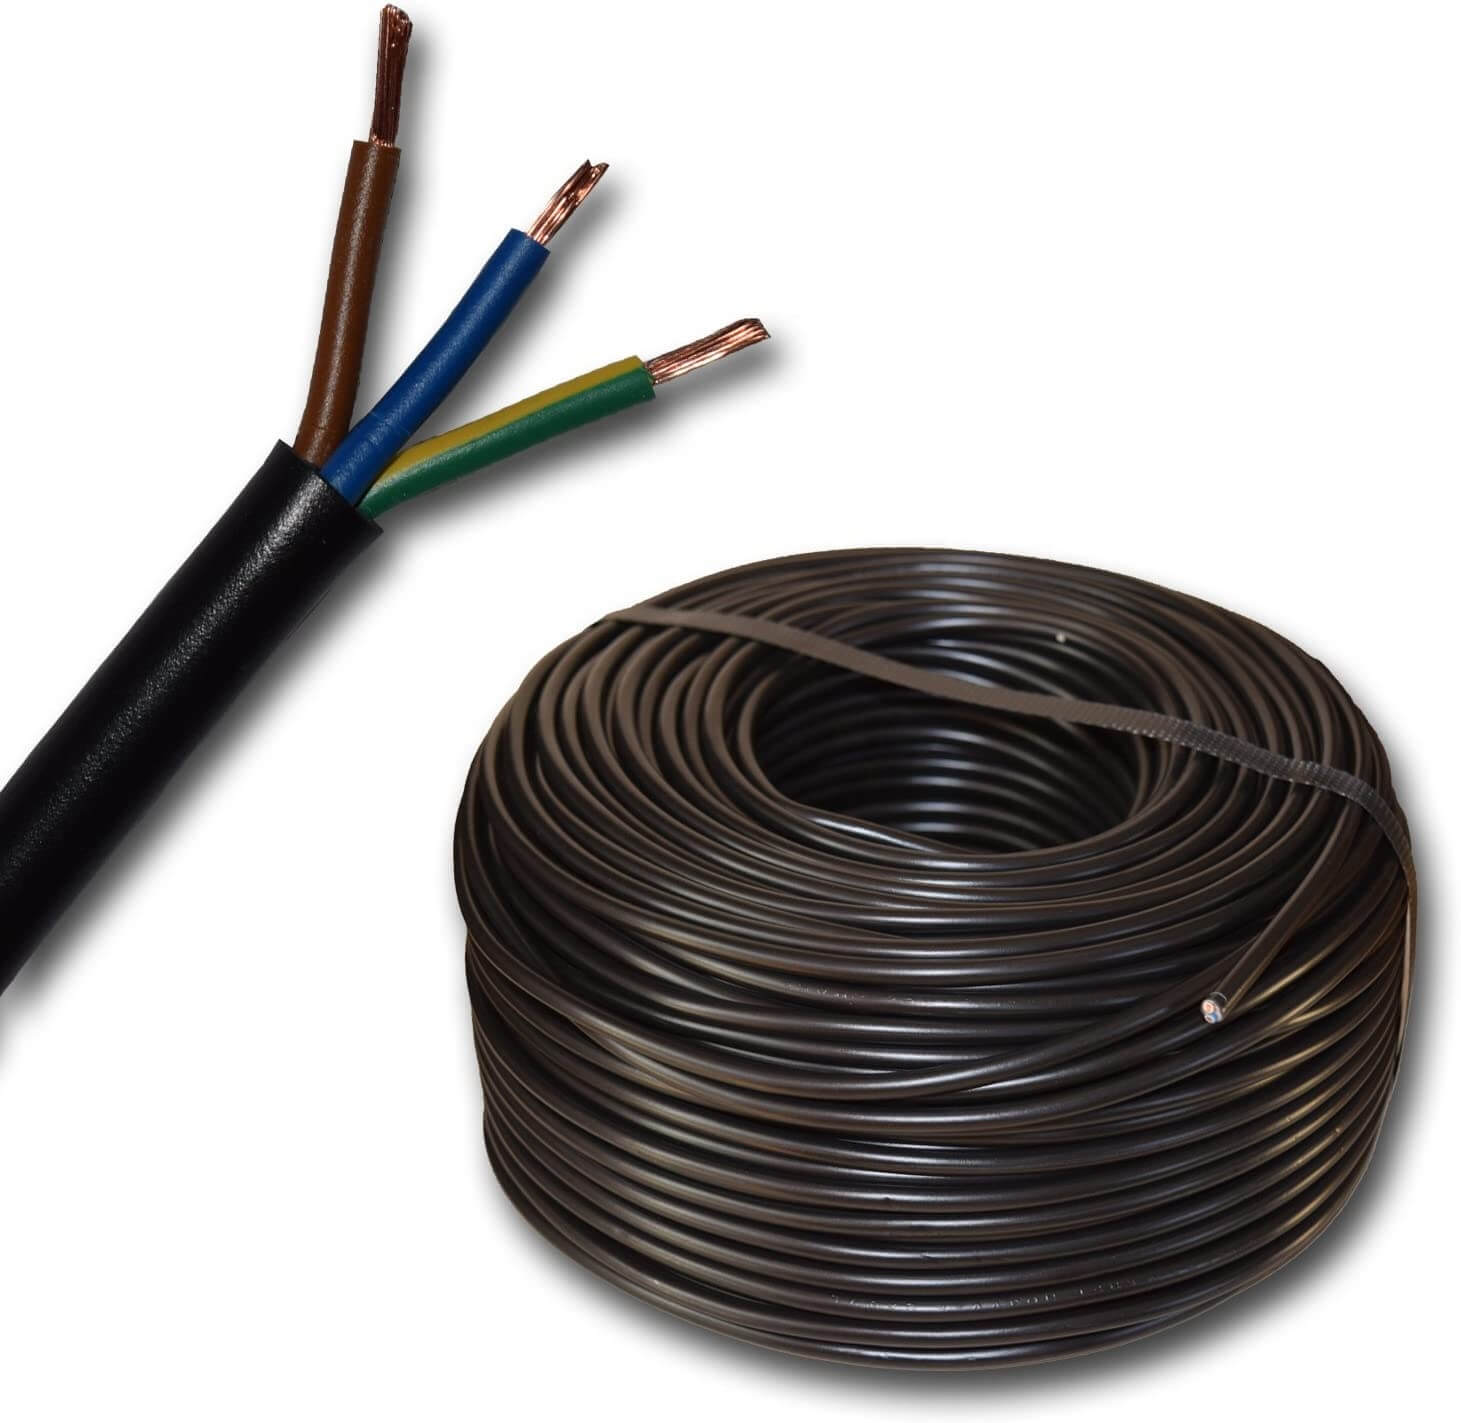 300/500V 3 Core 1.5mm 2.5mm 4mm 6mm 10mm H05VV-F Flexible Cable RVV 3*0.75mm Flexible Power Cable PVC Insulated Electrical Electric Cable and Wire